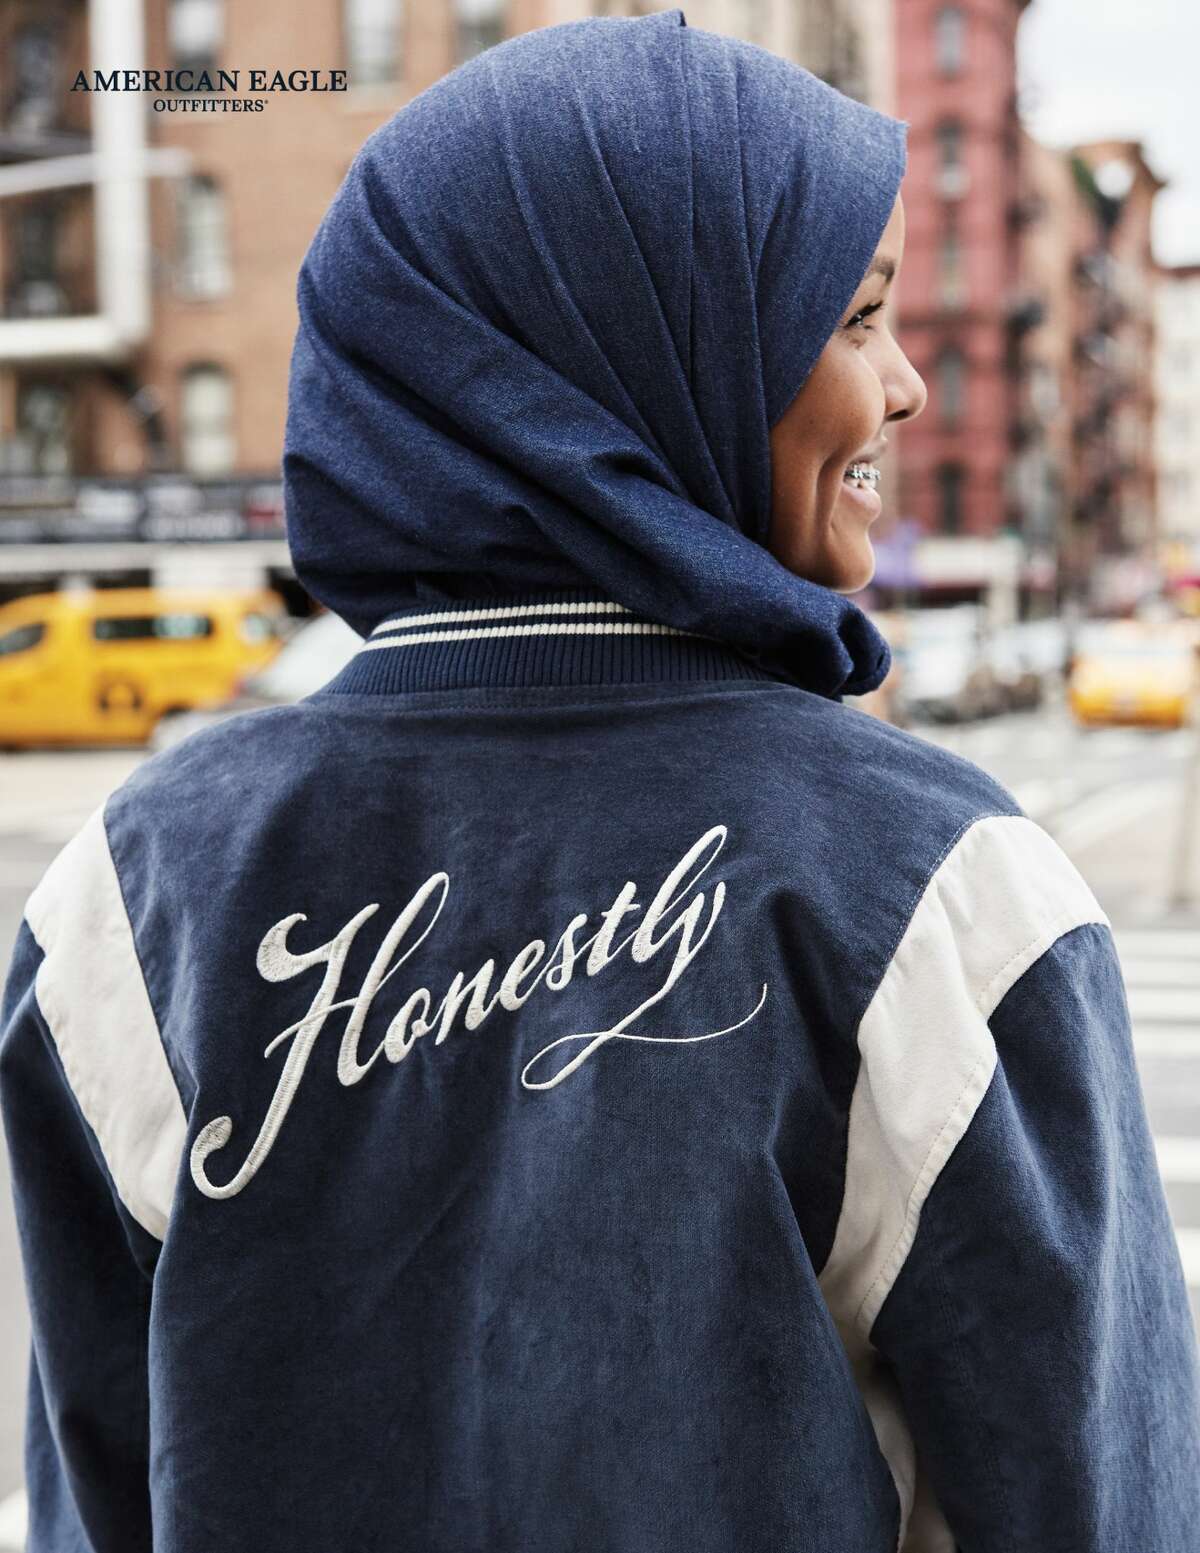 American Eagle Outfitters debuted a denim hijab as part of it's Fall '17 campaign. The product sold out in less than two weeks of being available online.